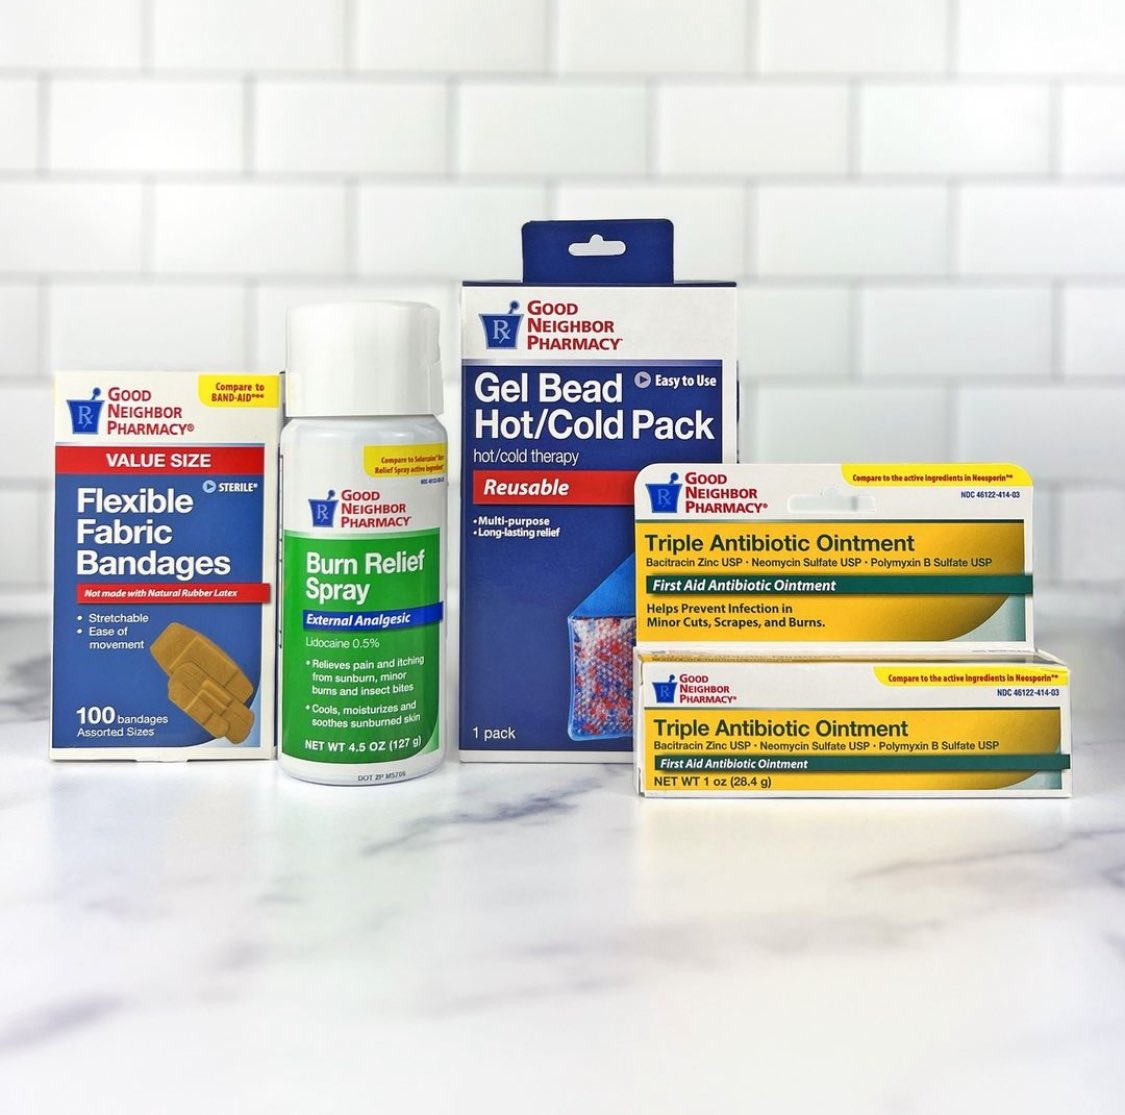 Get ready for the warmer months by stocking up on the products you need to keep you and your family safe and healthy! Speak with our pharmacist to learn more about which products we recommend you have on hand for an stress-free spring and summer. #FirstAidKit #OvertheCounter